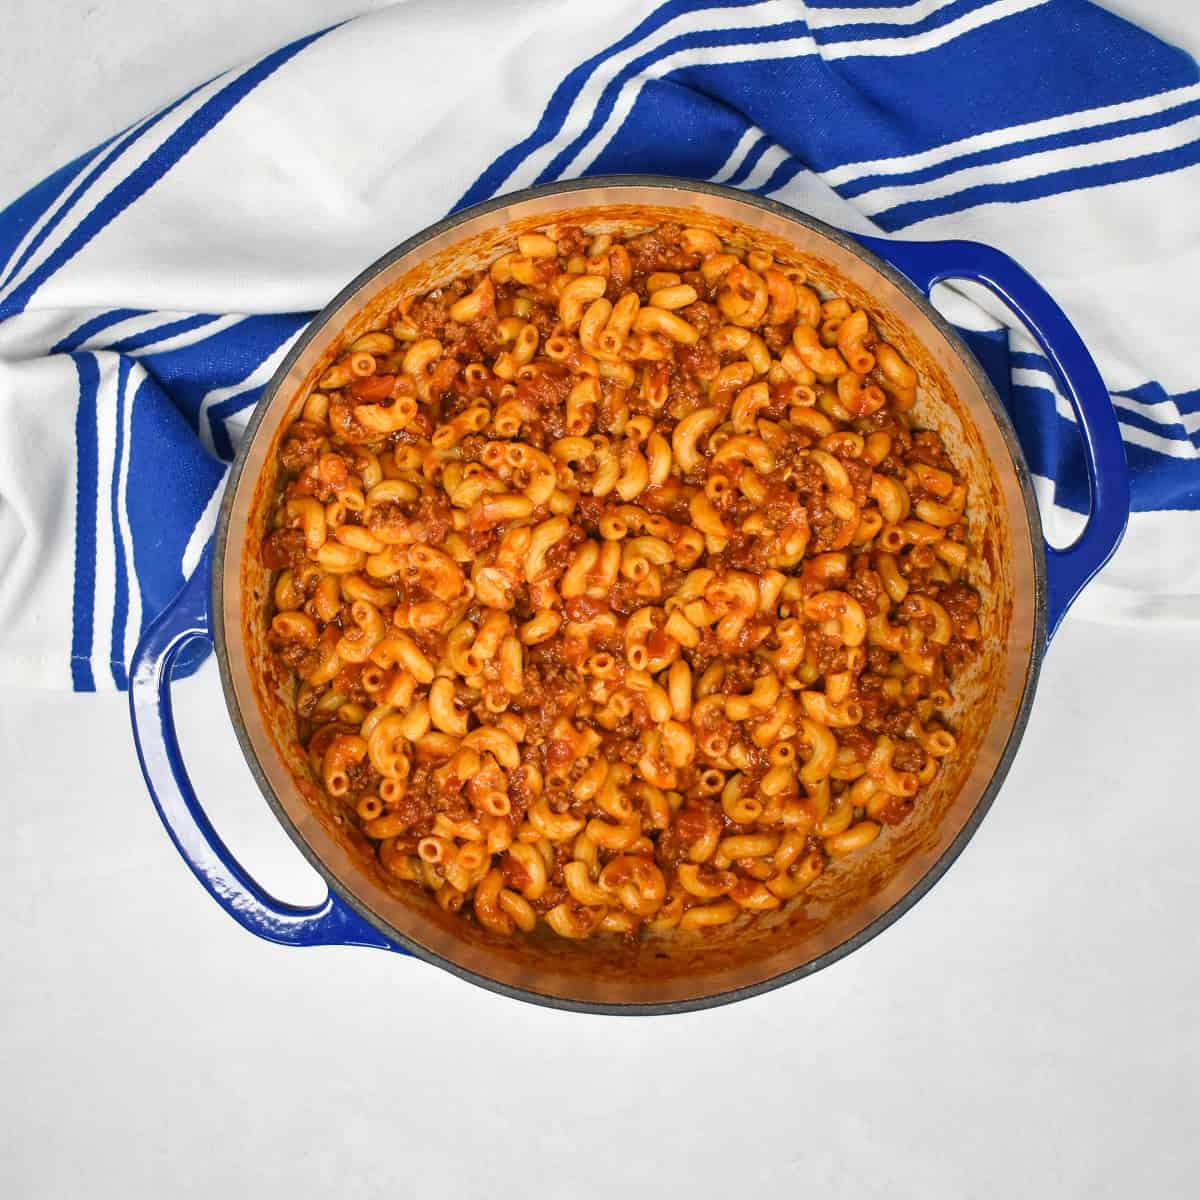 A top image of the beef and macaroni in a large blue pot set on a white table with a blue and white kitchen towel.